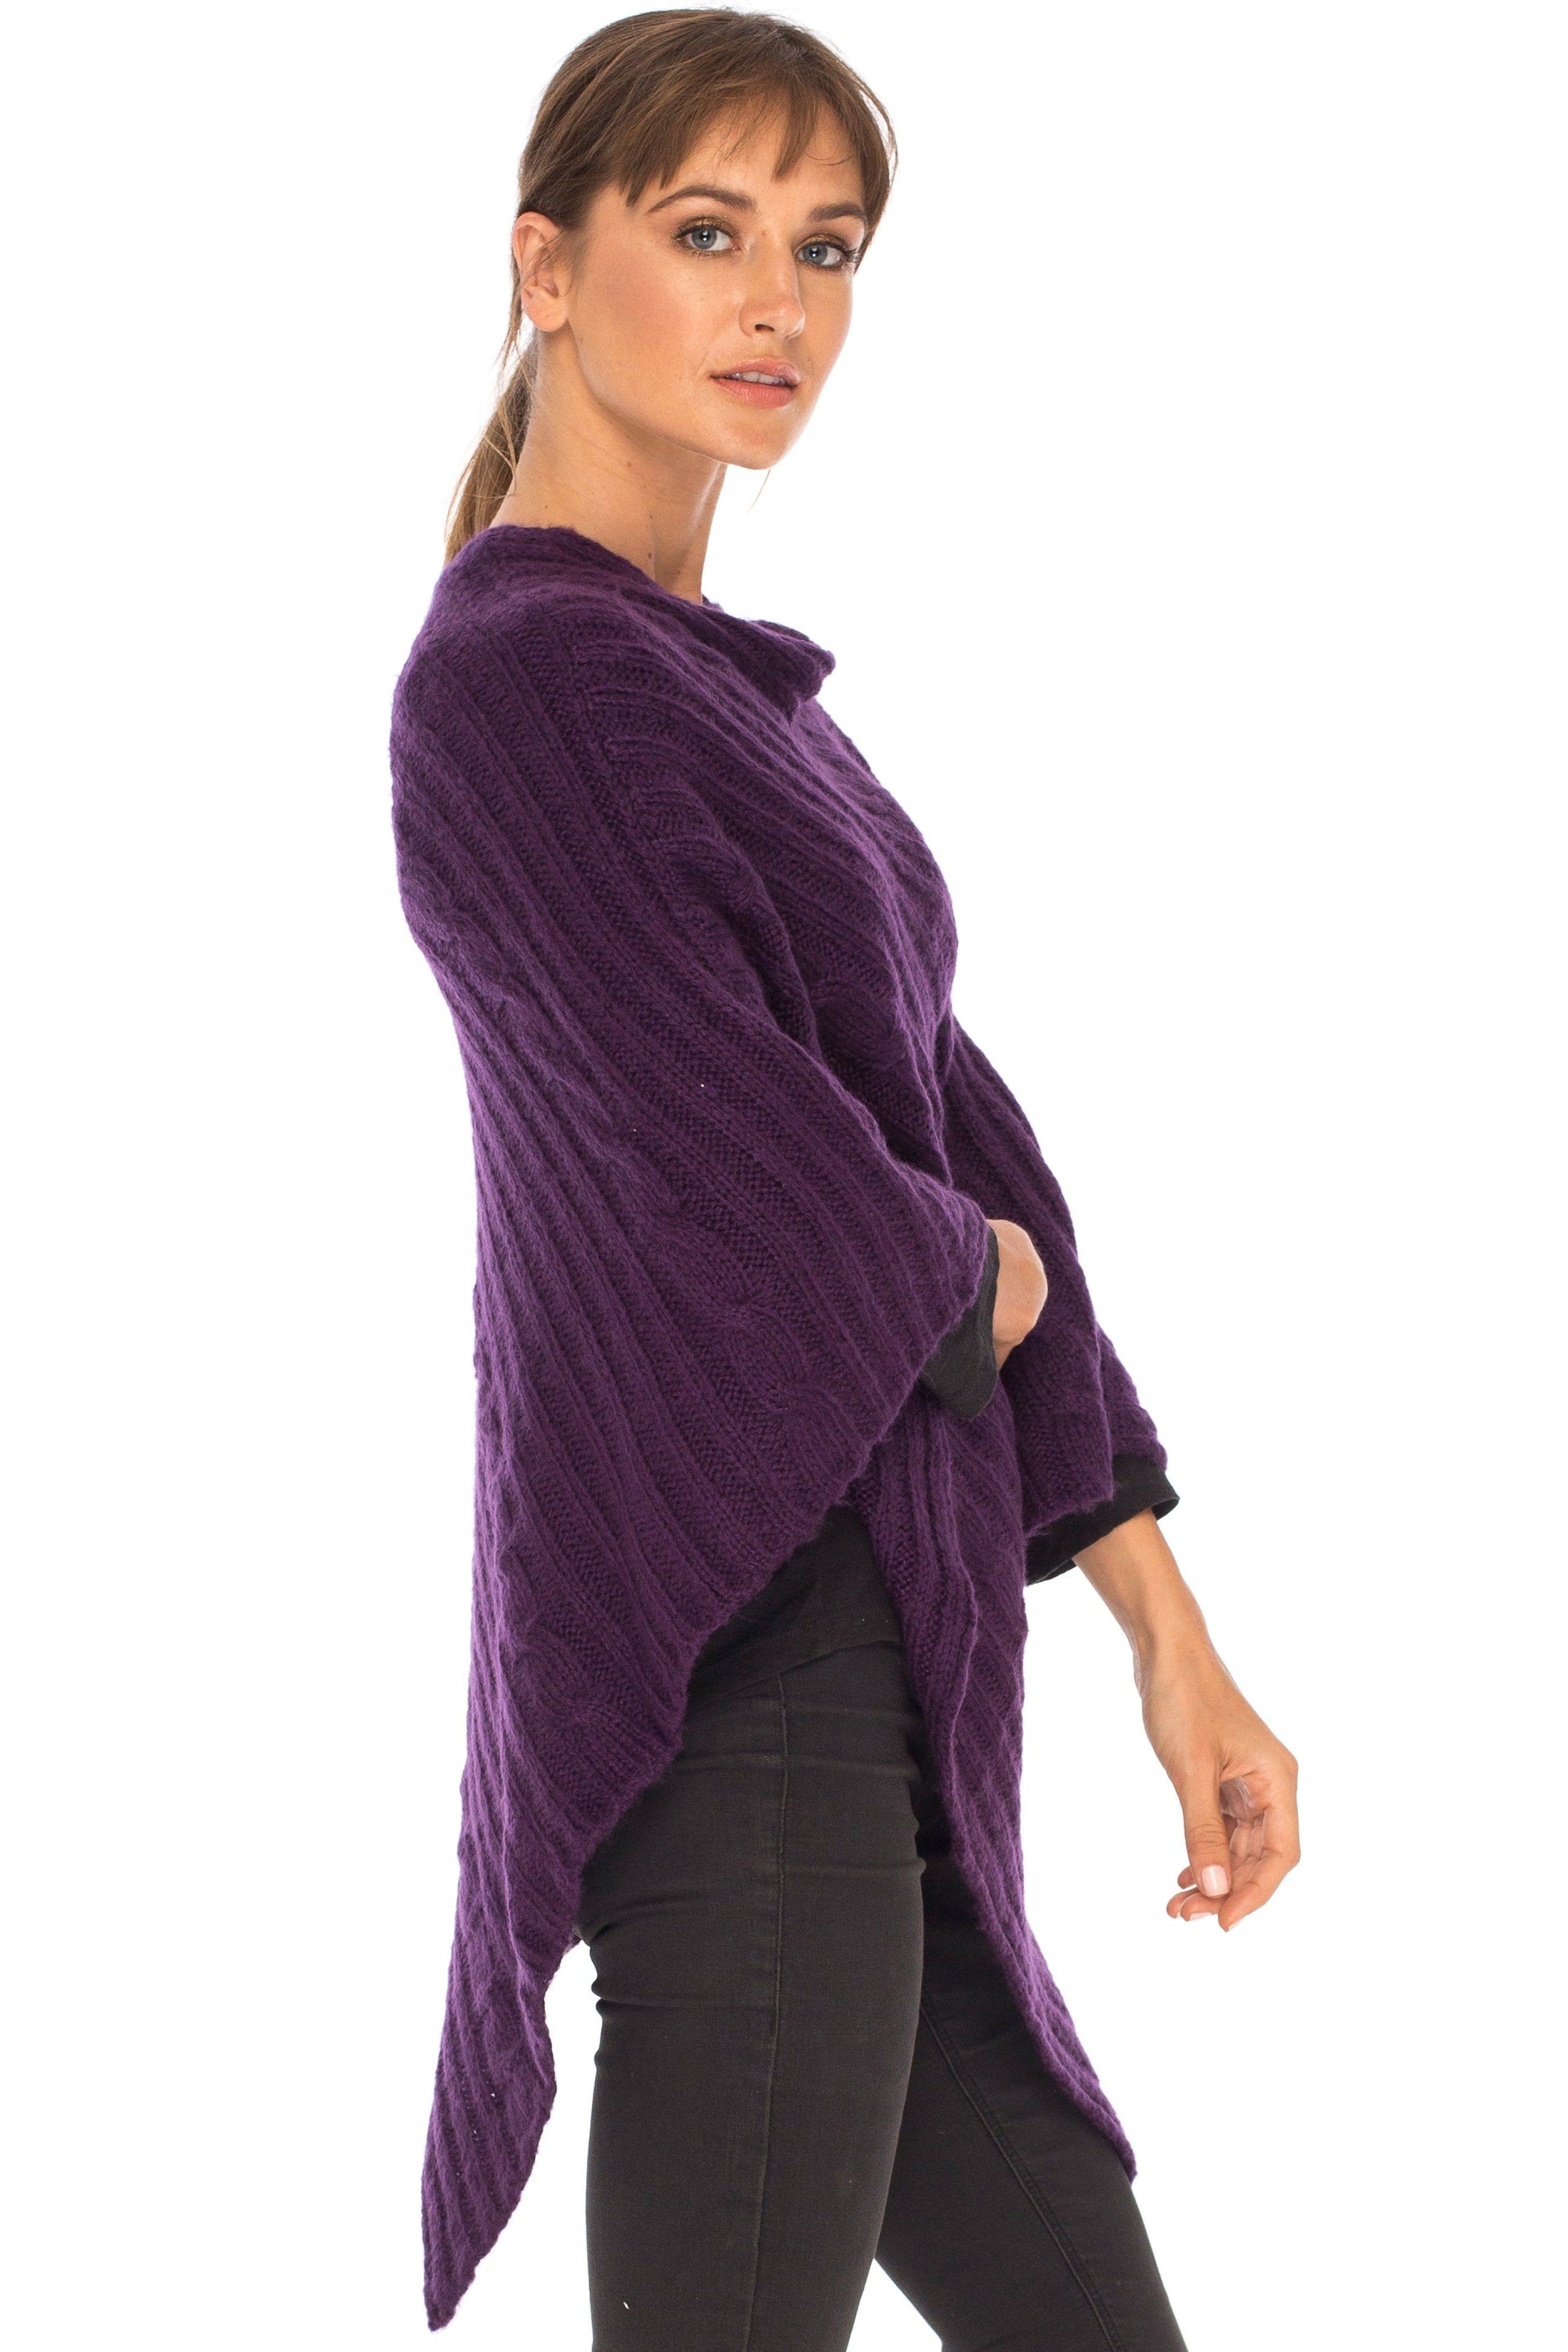 Cozette Cable Knit Poncho Pullover with Boat Neckline - Love-Shu-Shi